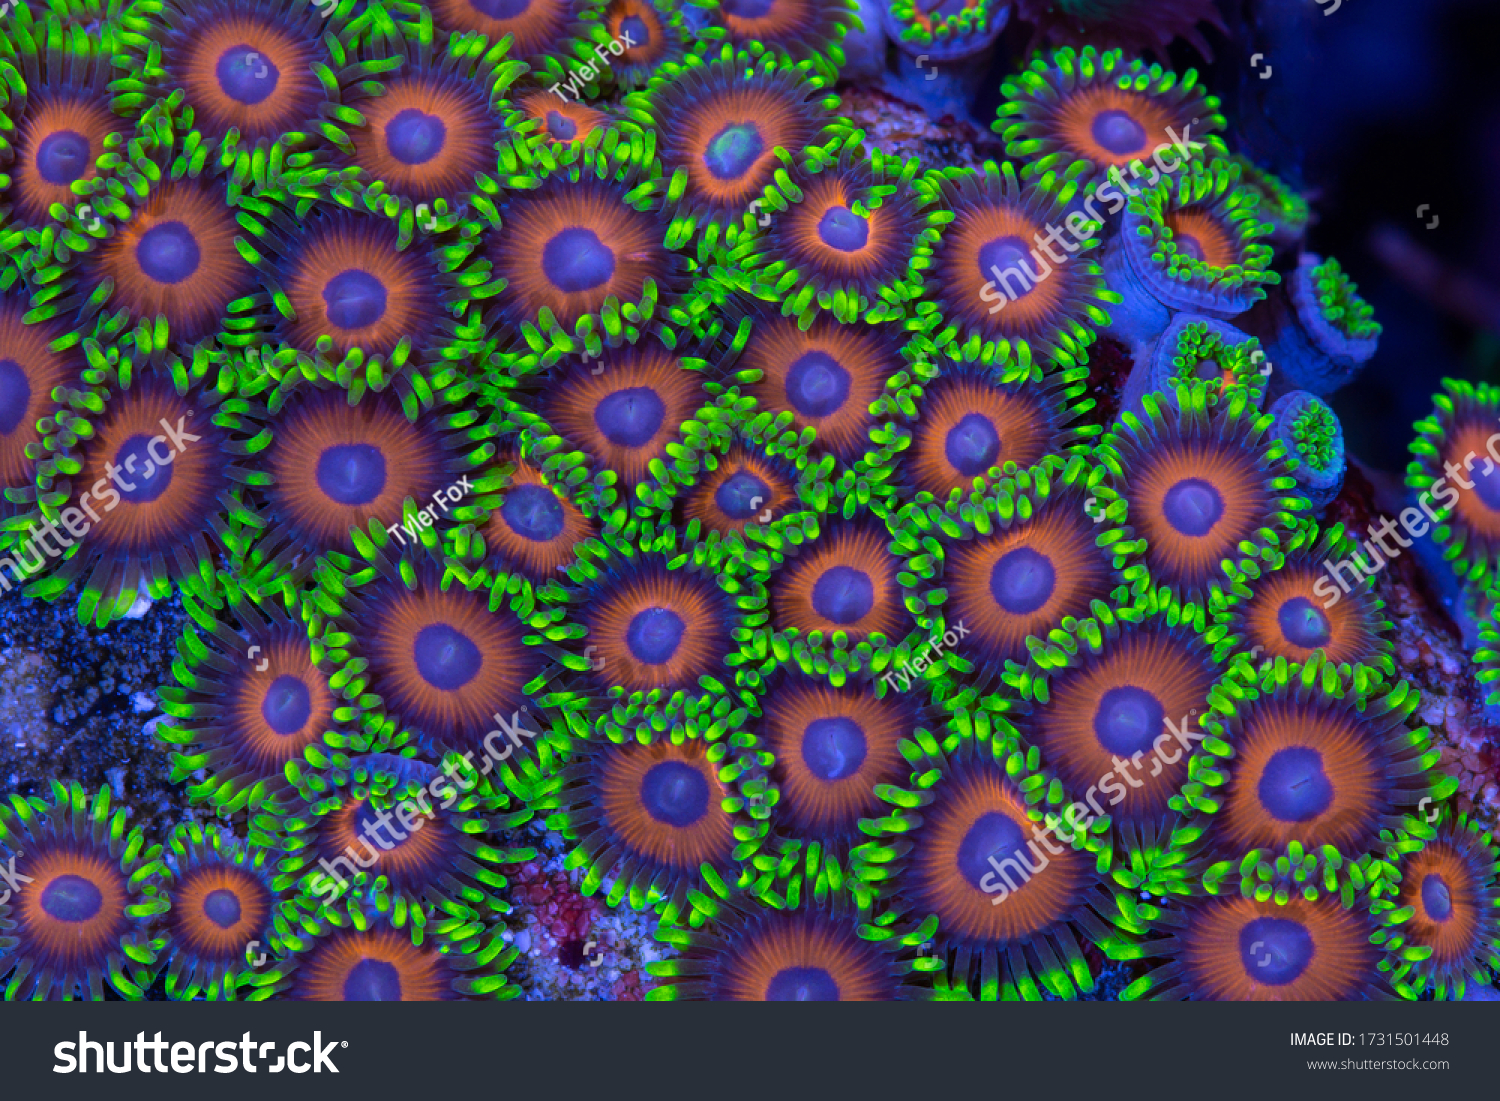 This is a colony of eagle eye zoanthids on a rock. #1731501448